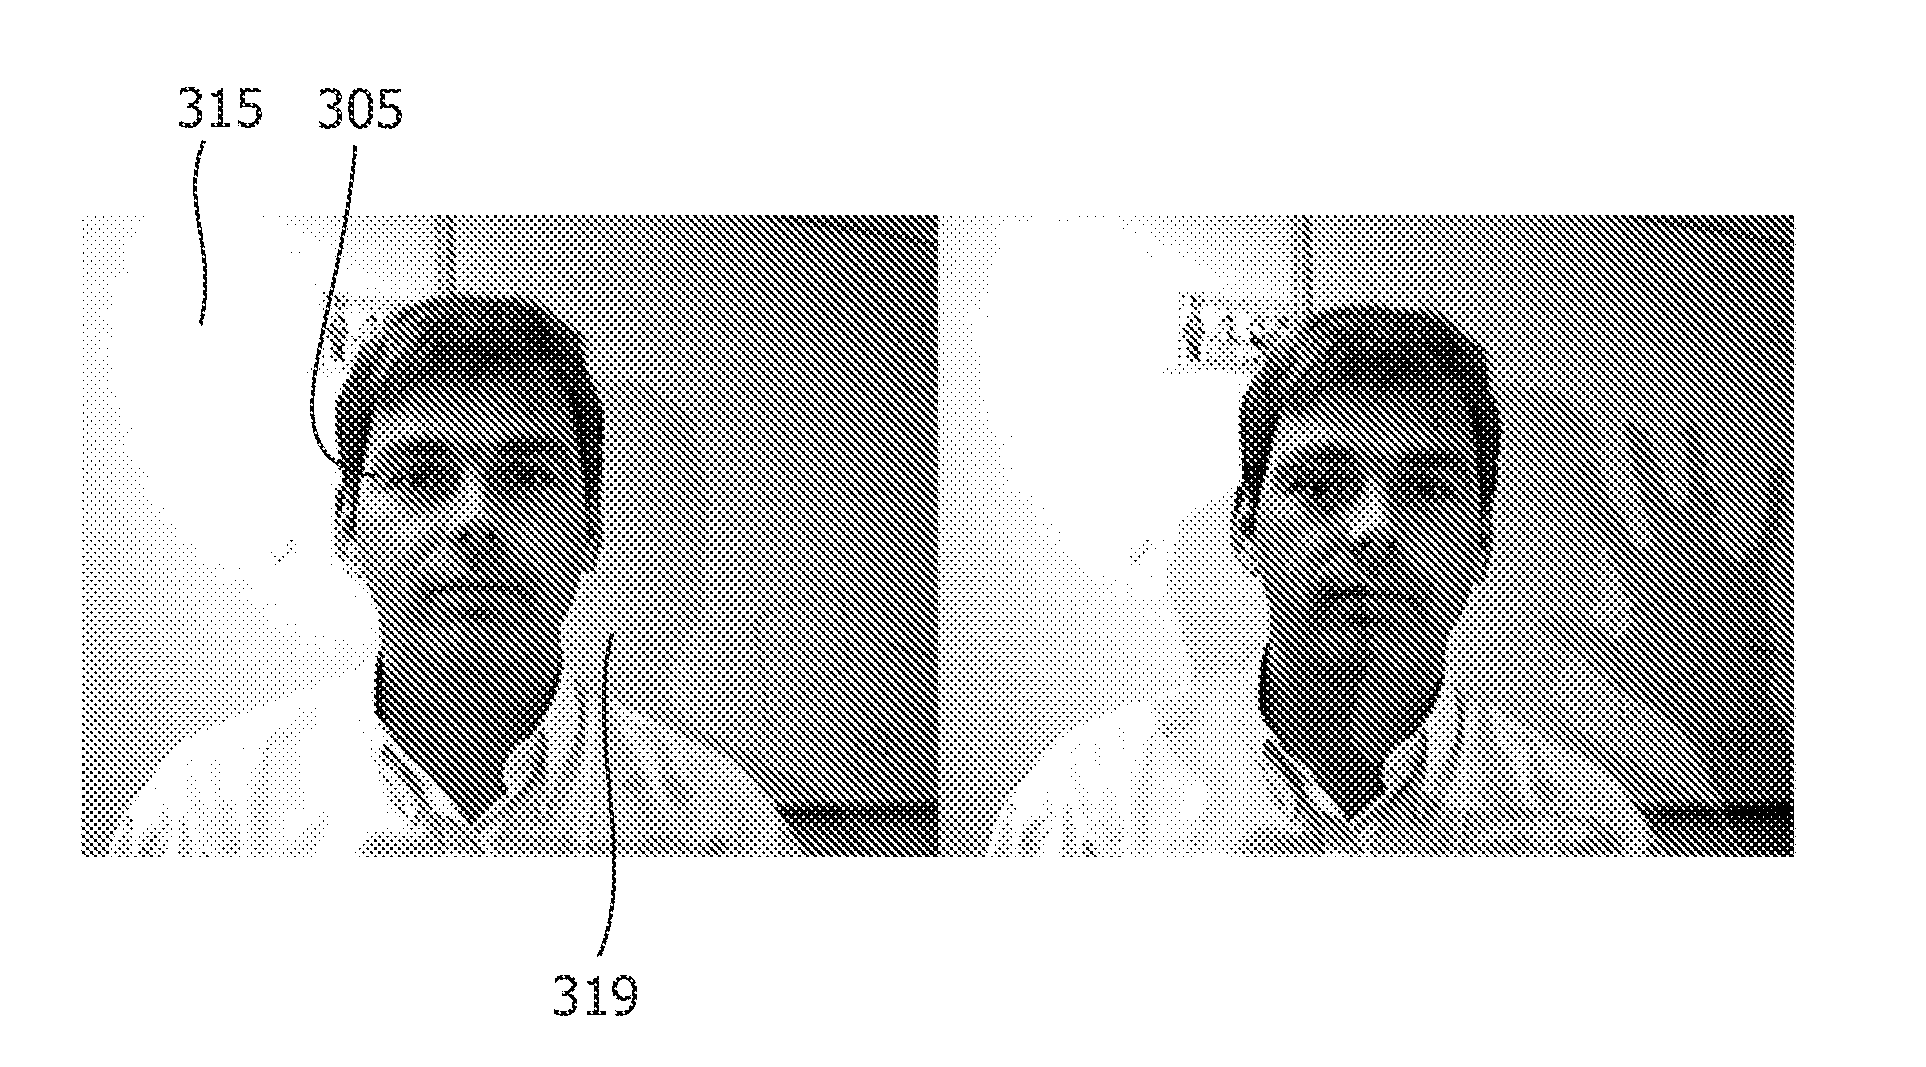 Method and apparatus for modifying a digital image